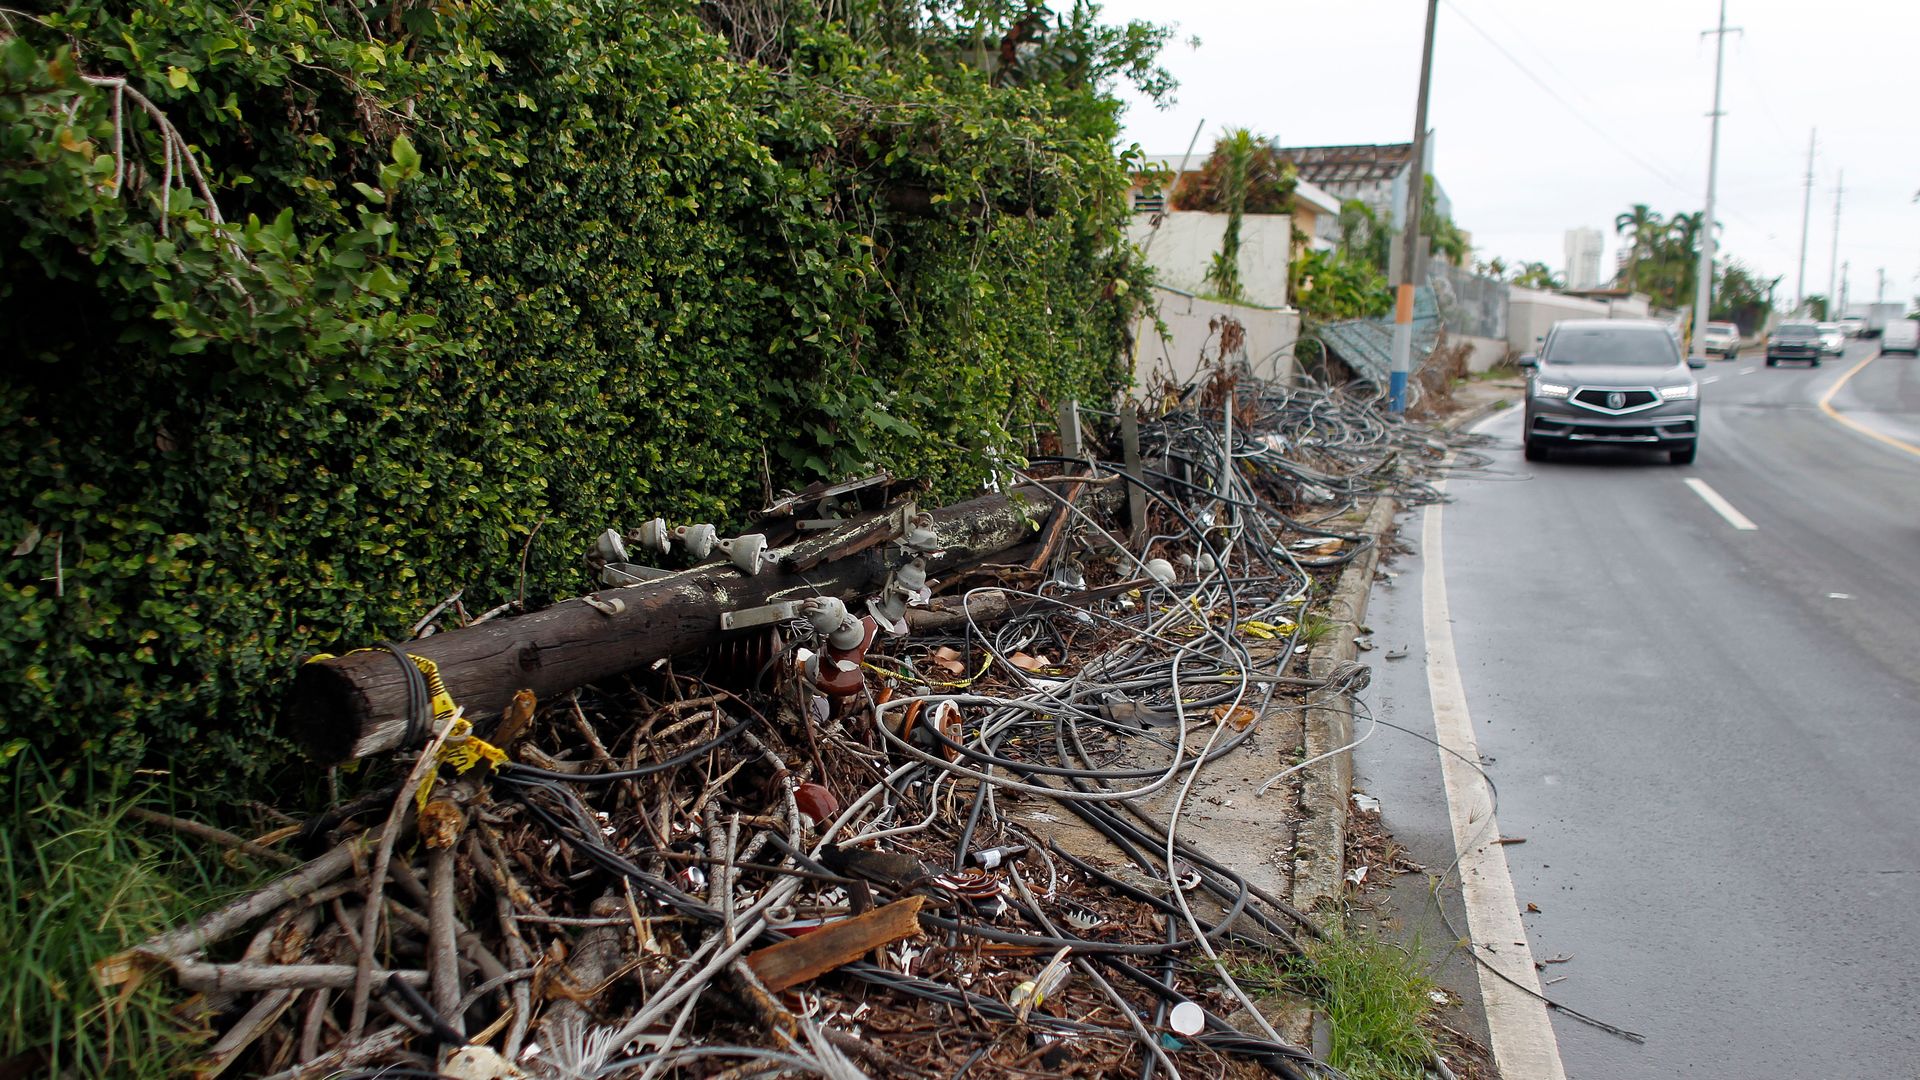 Power line poles and lines downed by the passing of Hurricane Maria lie on a sidewalk in San Juan, Puerto Rico on November 7, 2017.